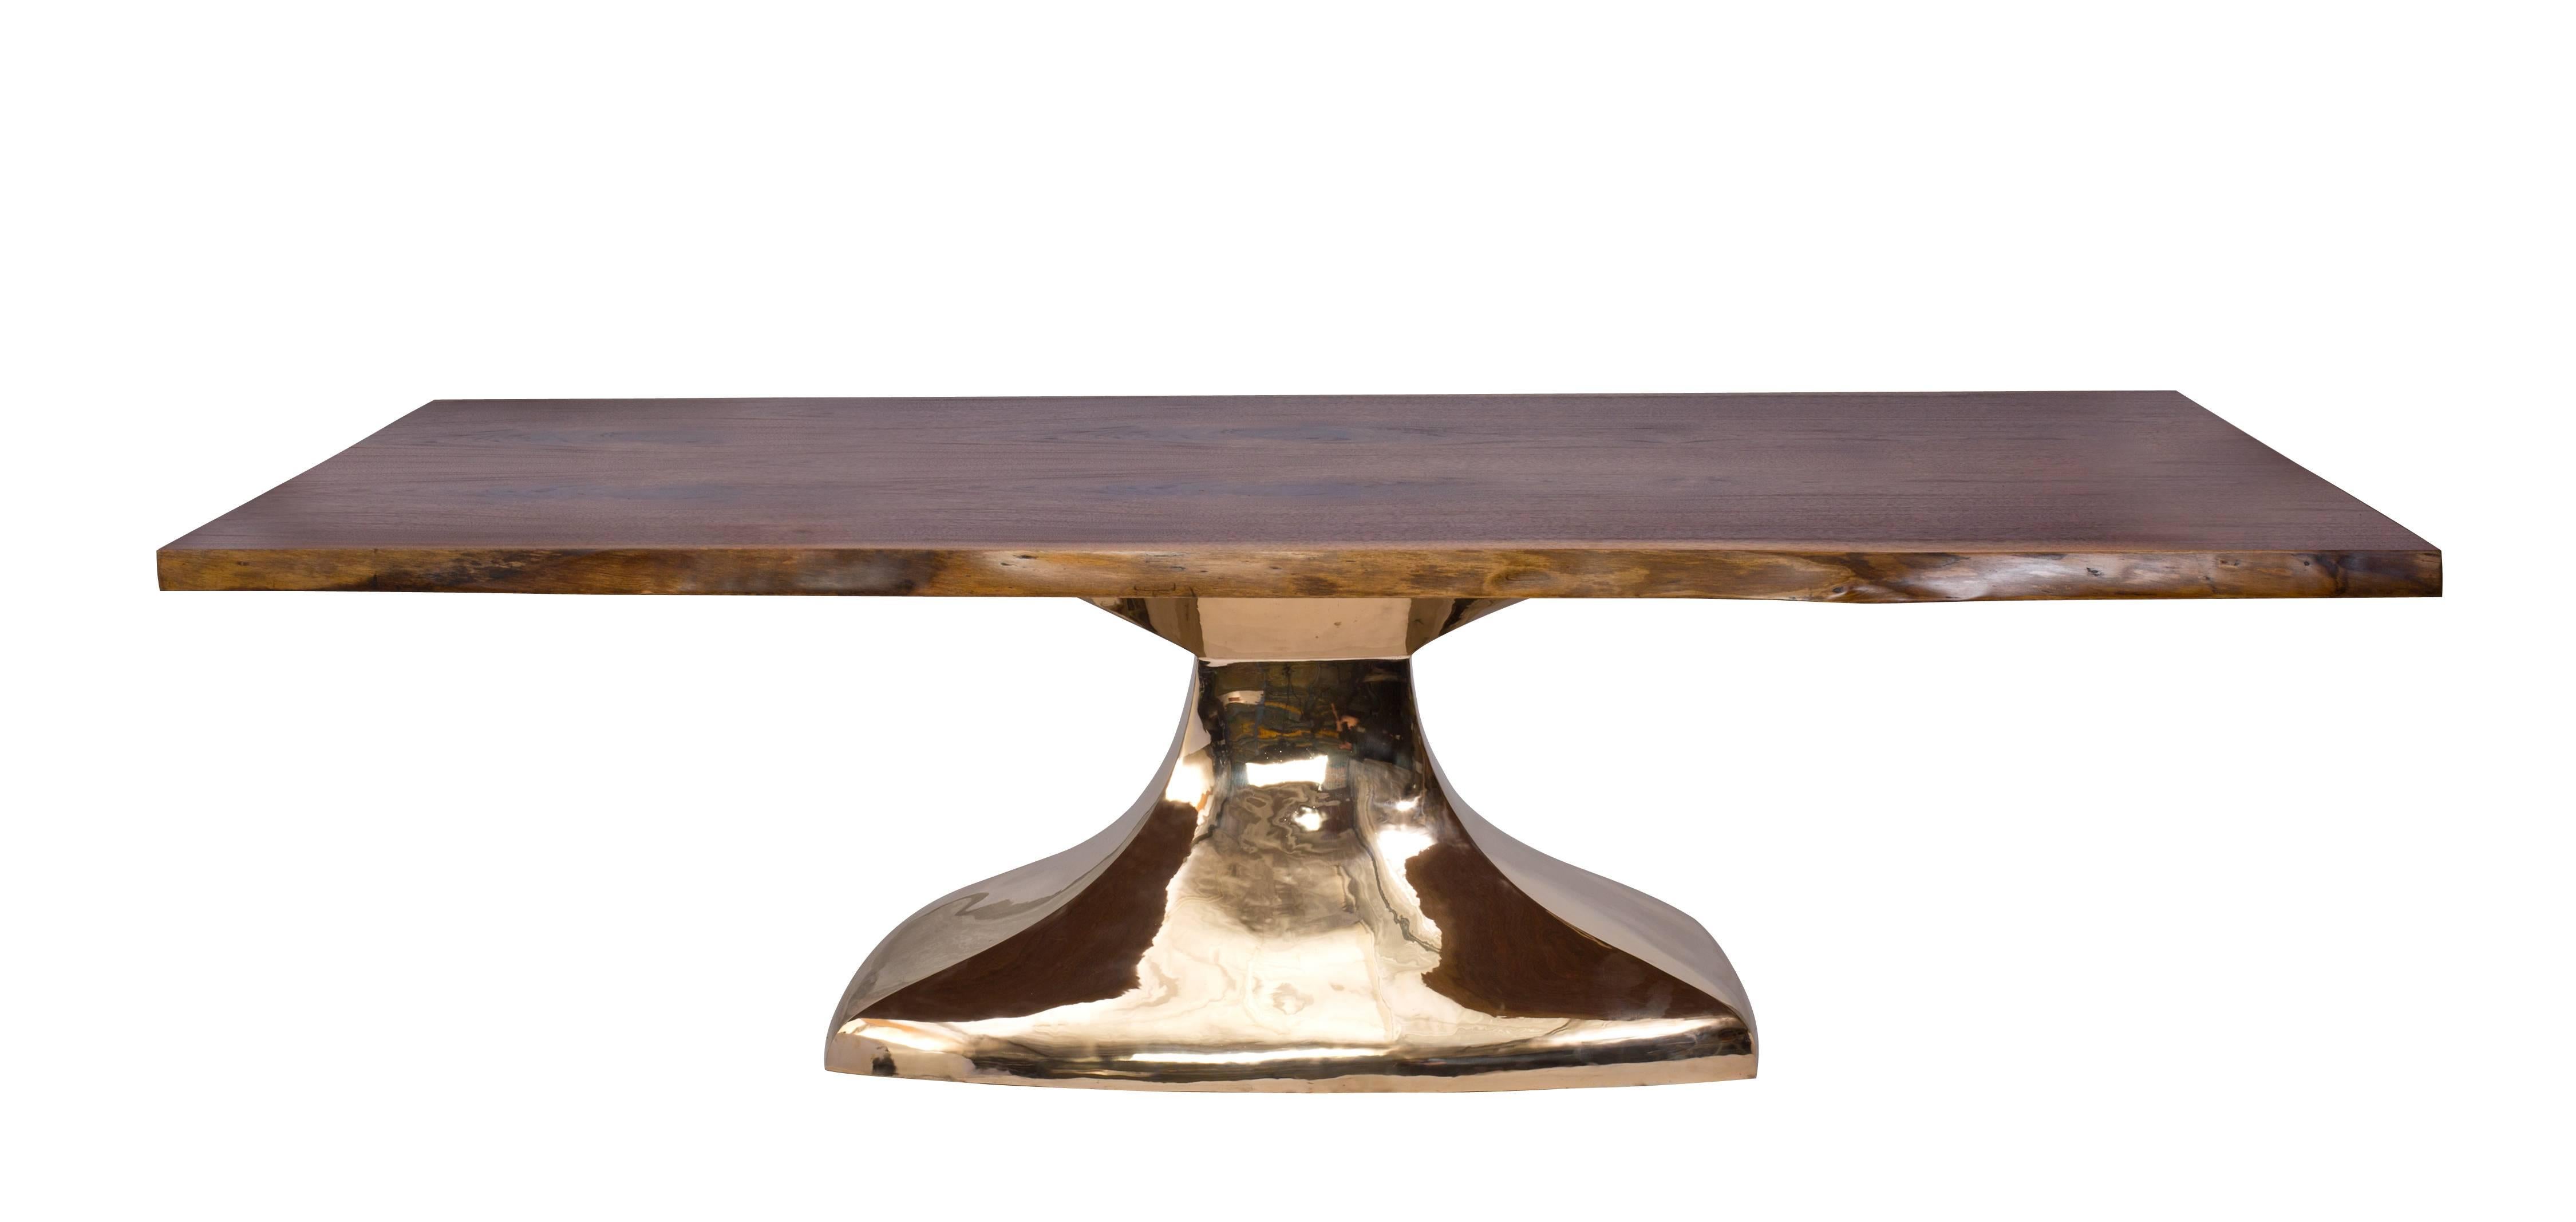 Hand-Carved Nine Foot Hand-Sculpted Bronze and Walnut Dining Table by Bret Cavanaugh